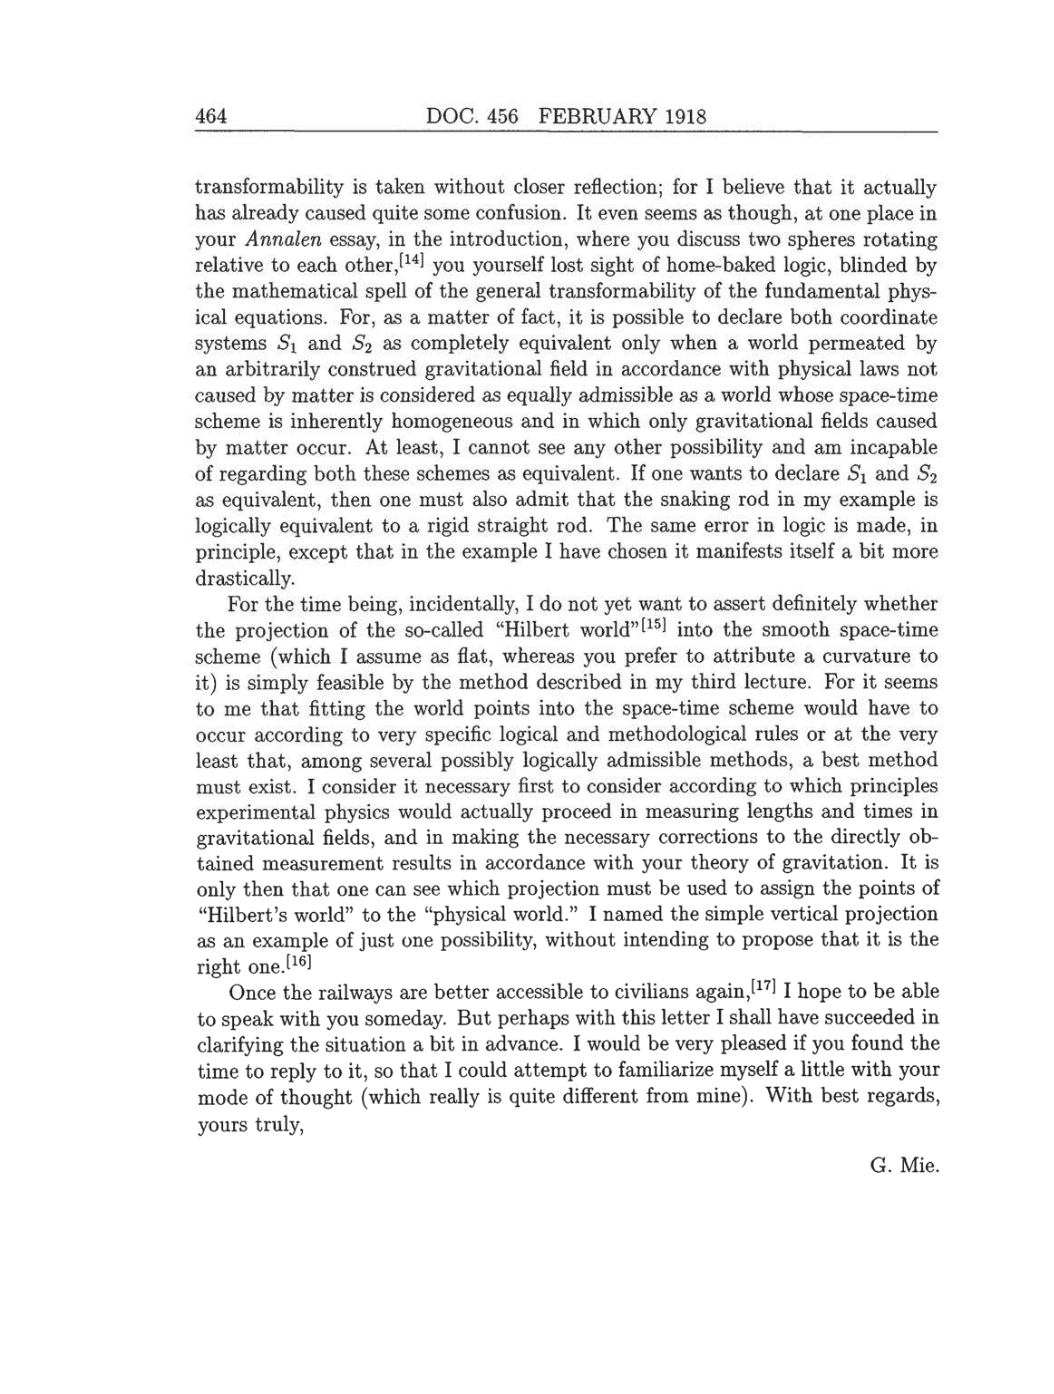 Volume 8: The Berlin Years: Correspondence, 1914-1918 (English translation supplement) page 464